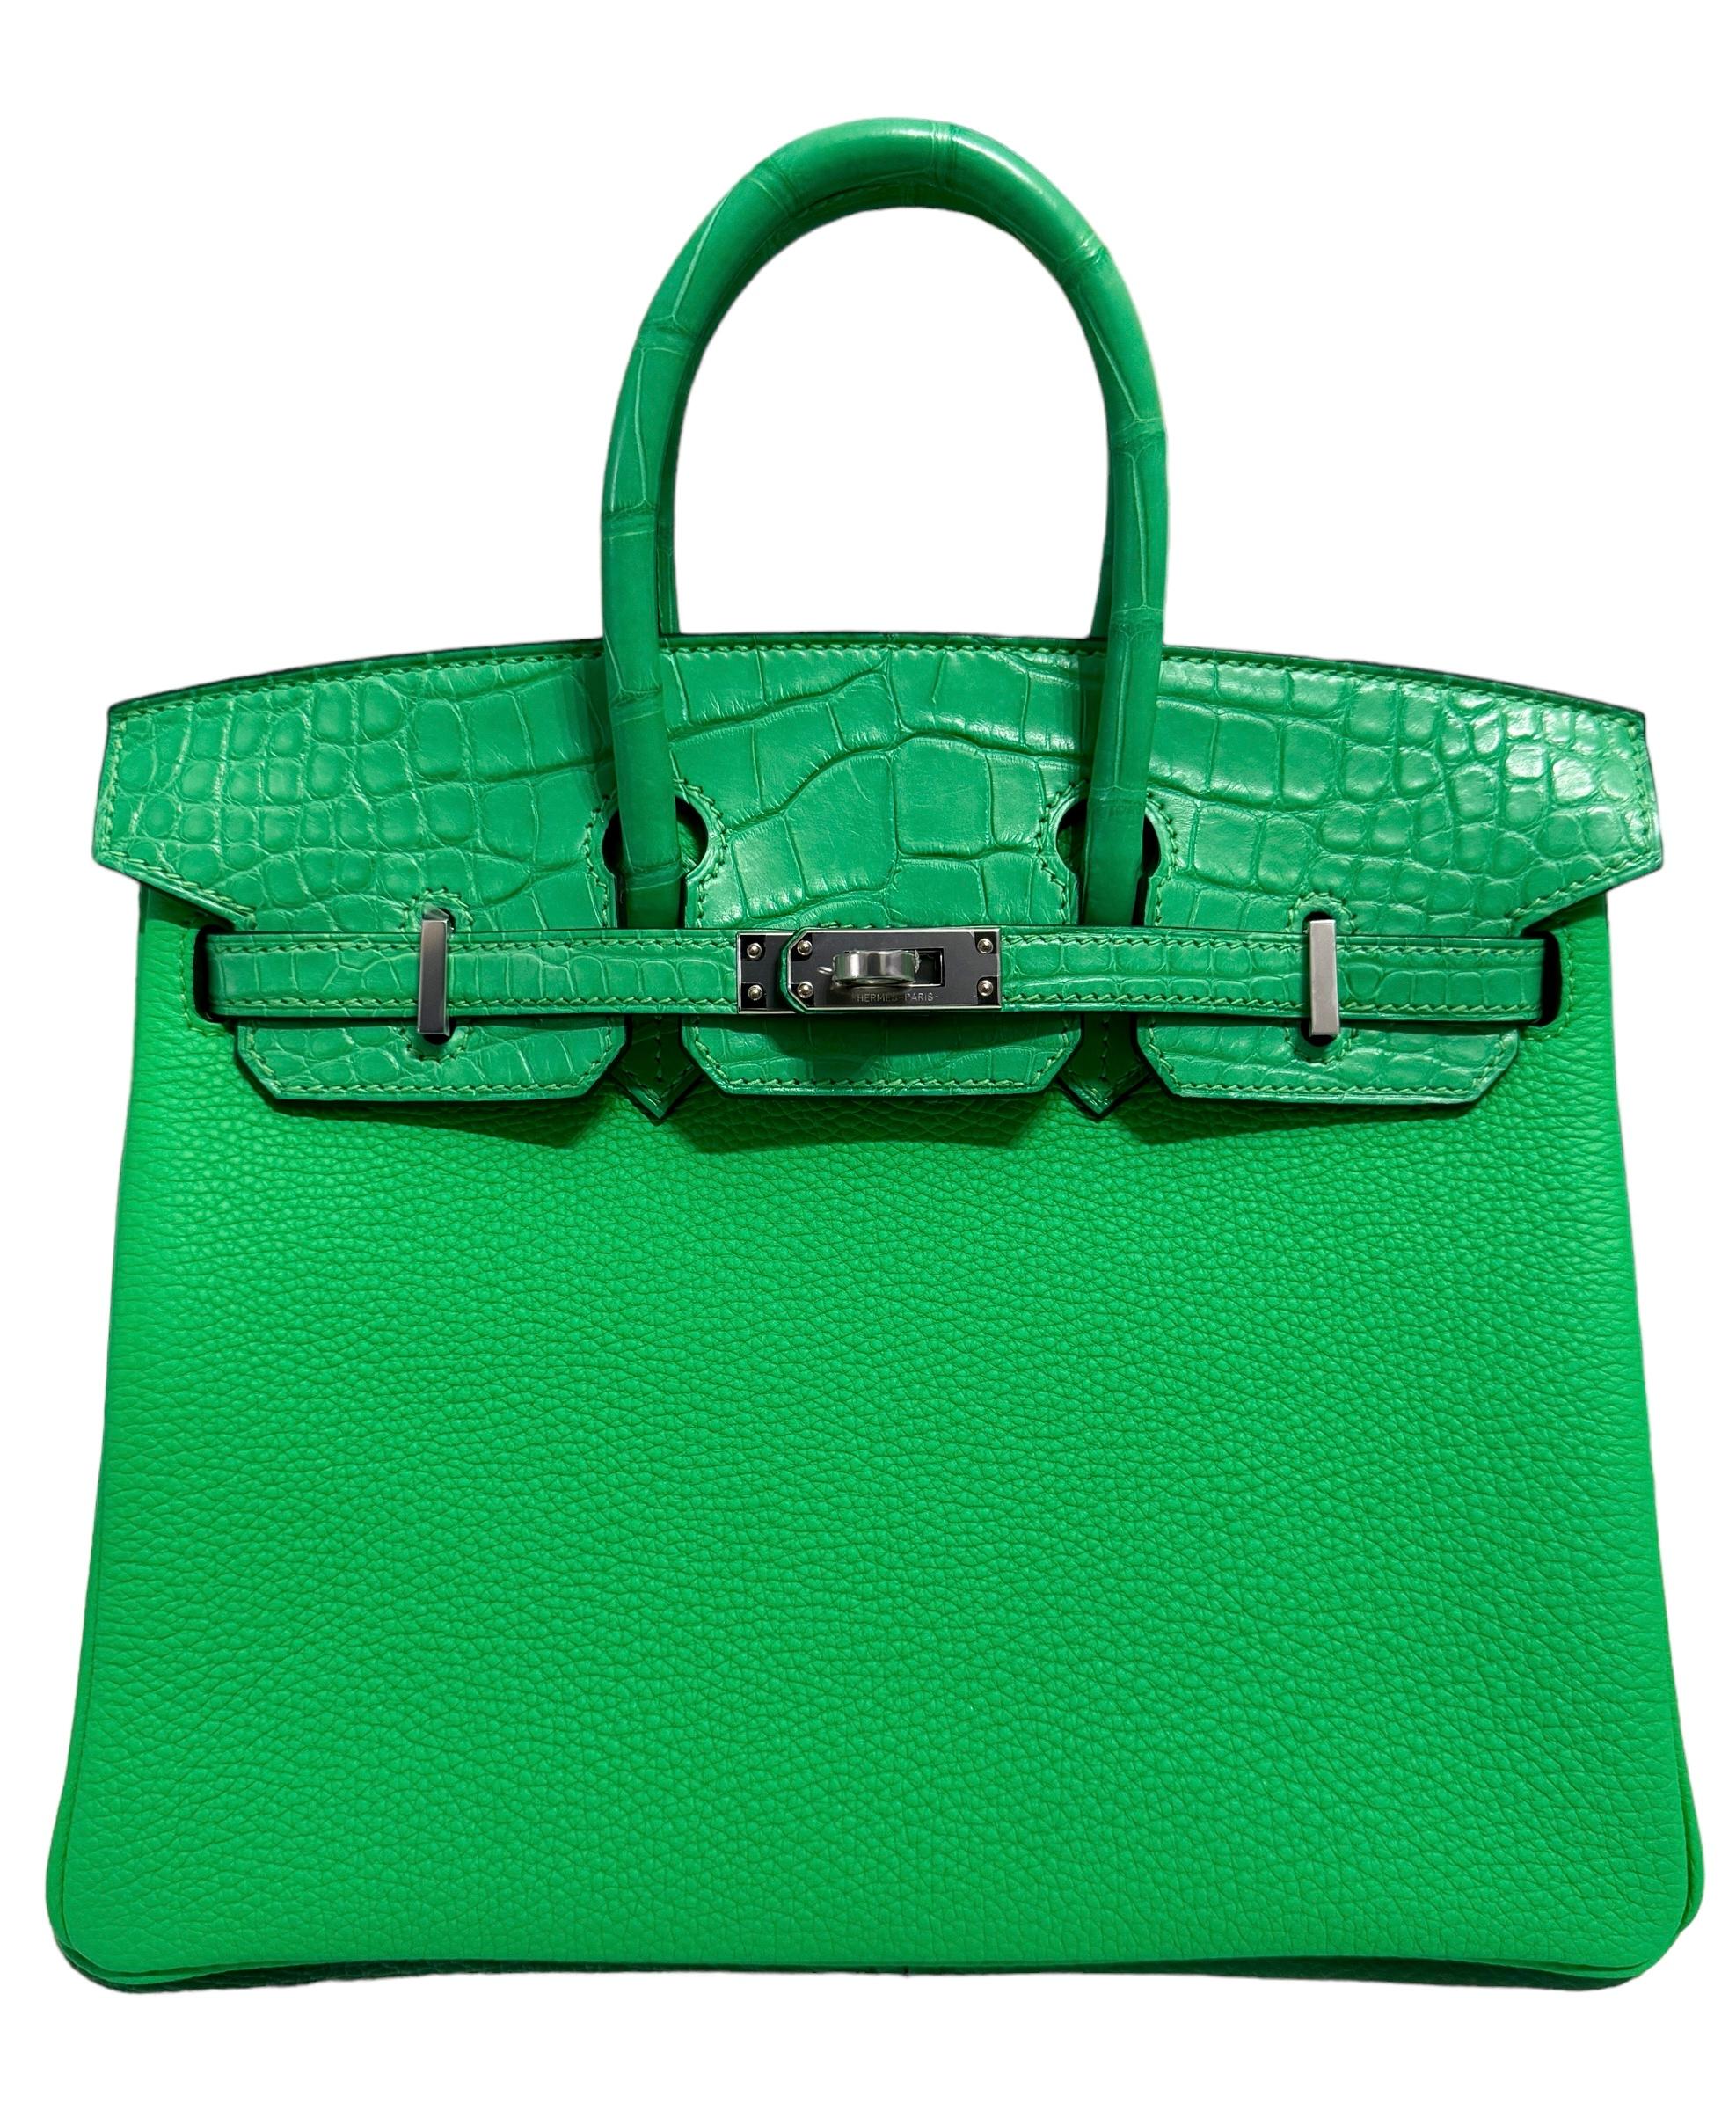 Ultra Rare and Most Difficult to get! Brand New Hermes Birkin 25 Touch Vert Comics Togo Leather and Matte Alligator Palladium Hardware. New B Stamp 2023.

Shop With Confidence from Lux Addicts. Authenticity Guaranteed!